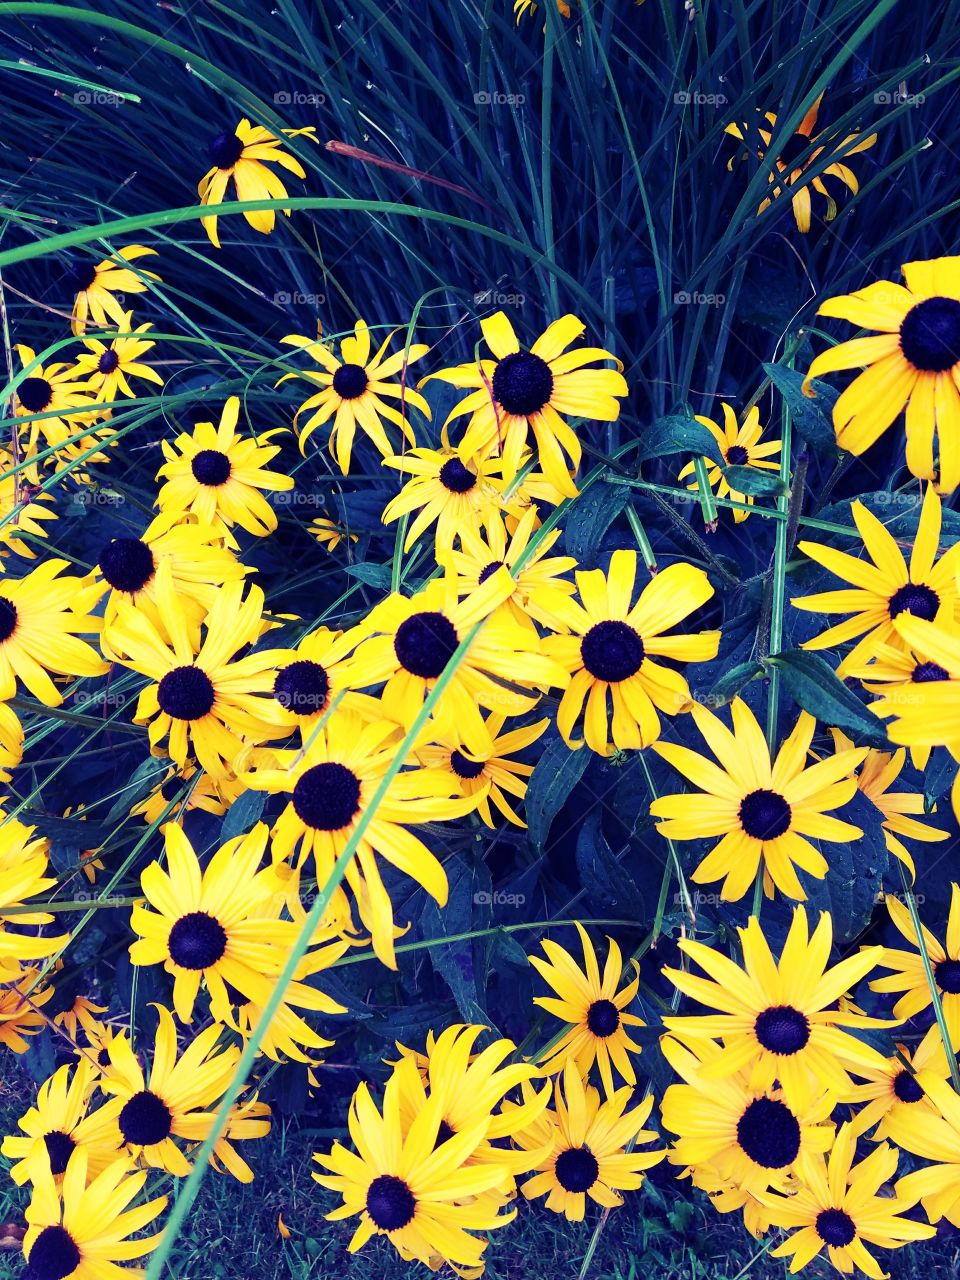 New York City - August 2017 - Taken on Android Phone - Galaxy S7 - Black Eyed Susan Flowers in Bayside NY